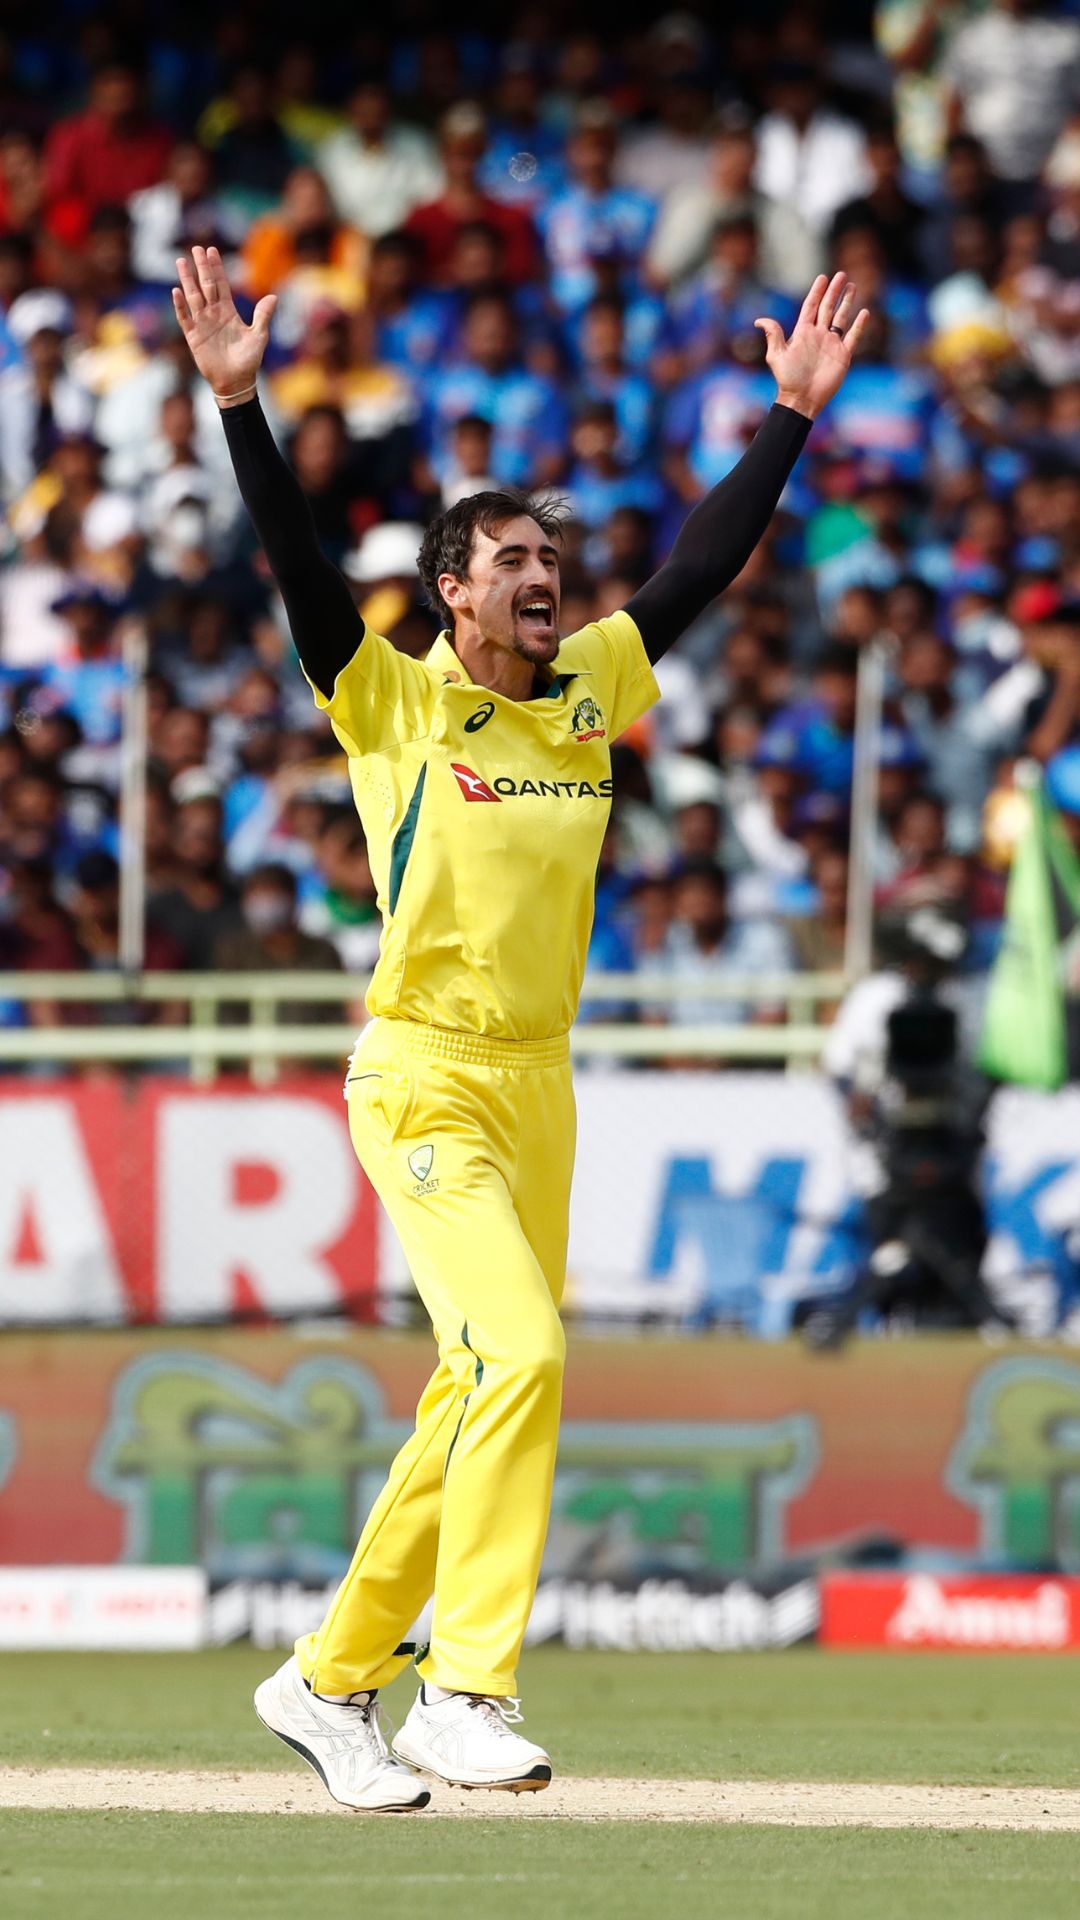 How has Mitchell Starc performed in IPL?